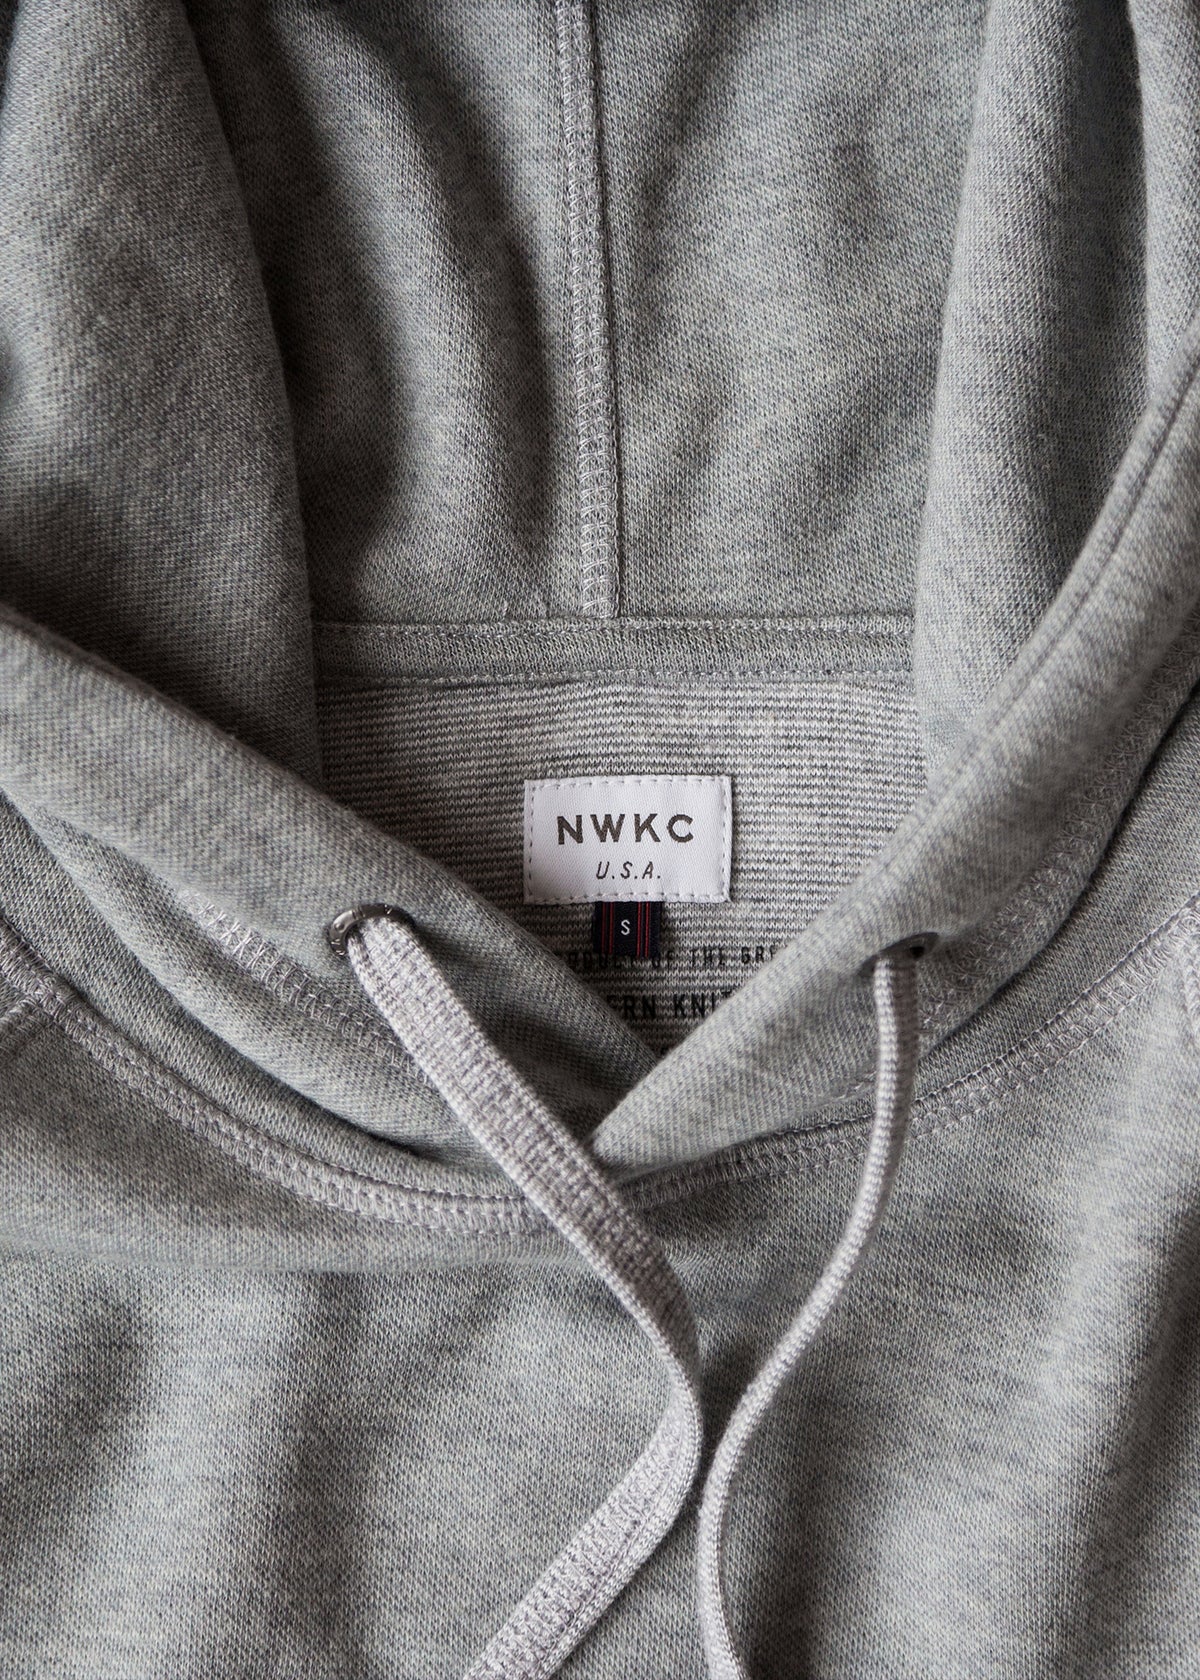 003 - PULLOVER - FEATHER GRAY - Wilson & Willy's - MPLS Neighbor Goods